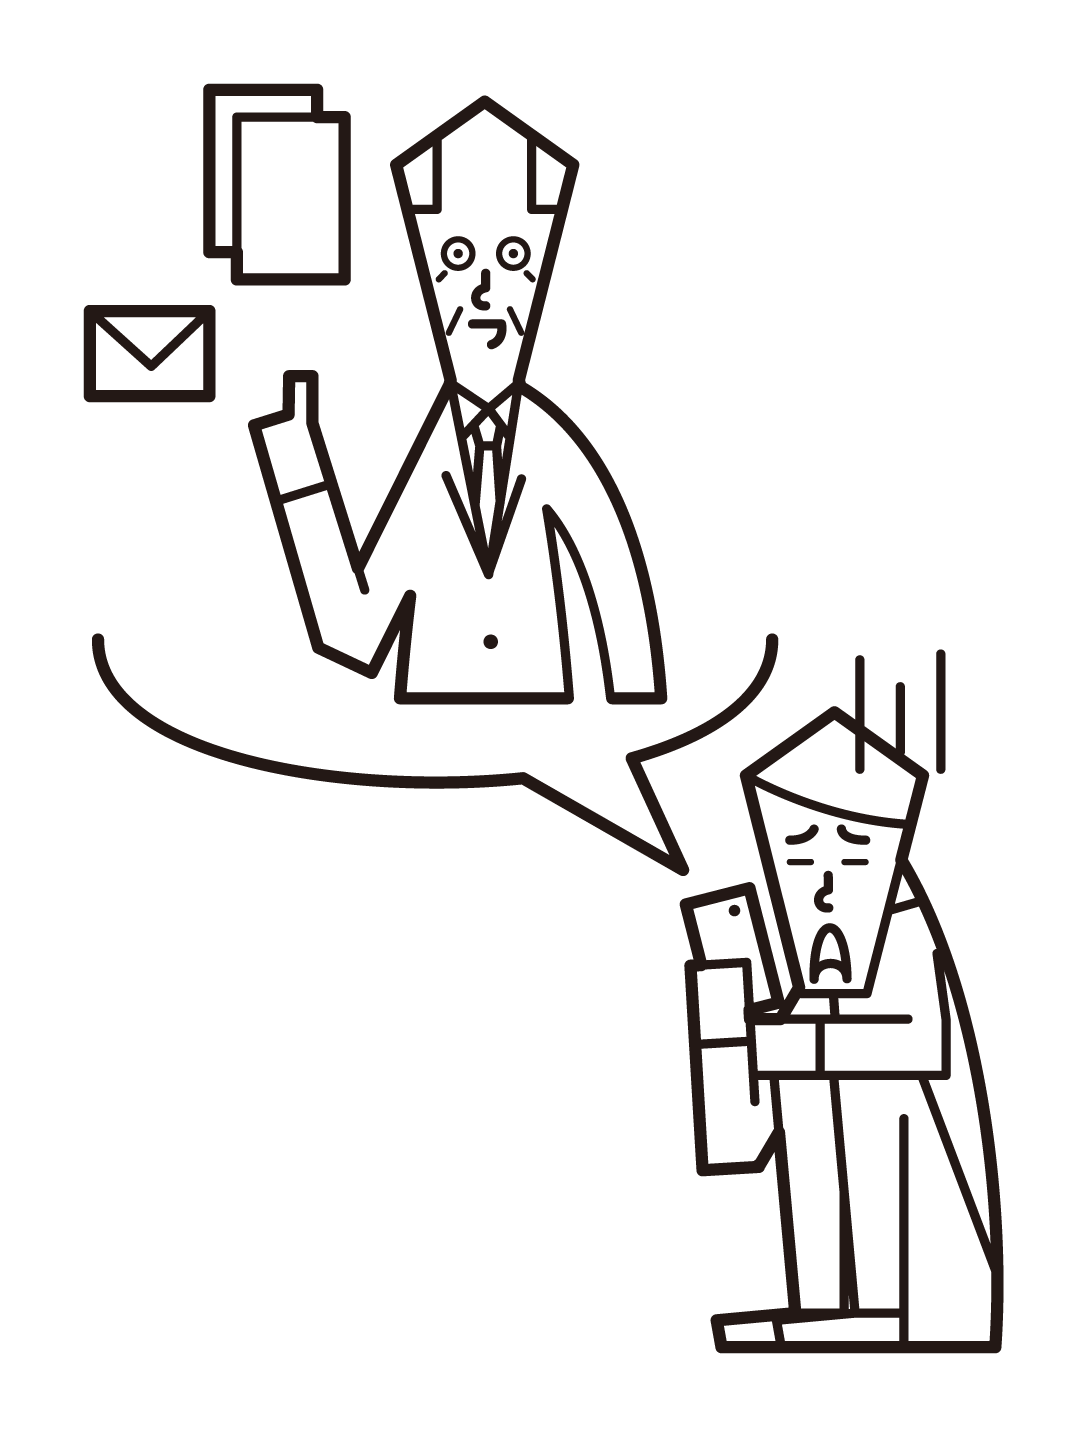 Illustration of a man who suffers from contact from his boss